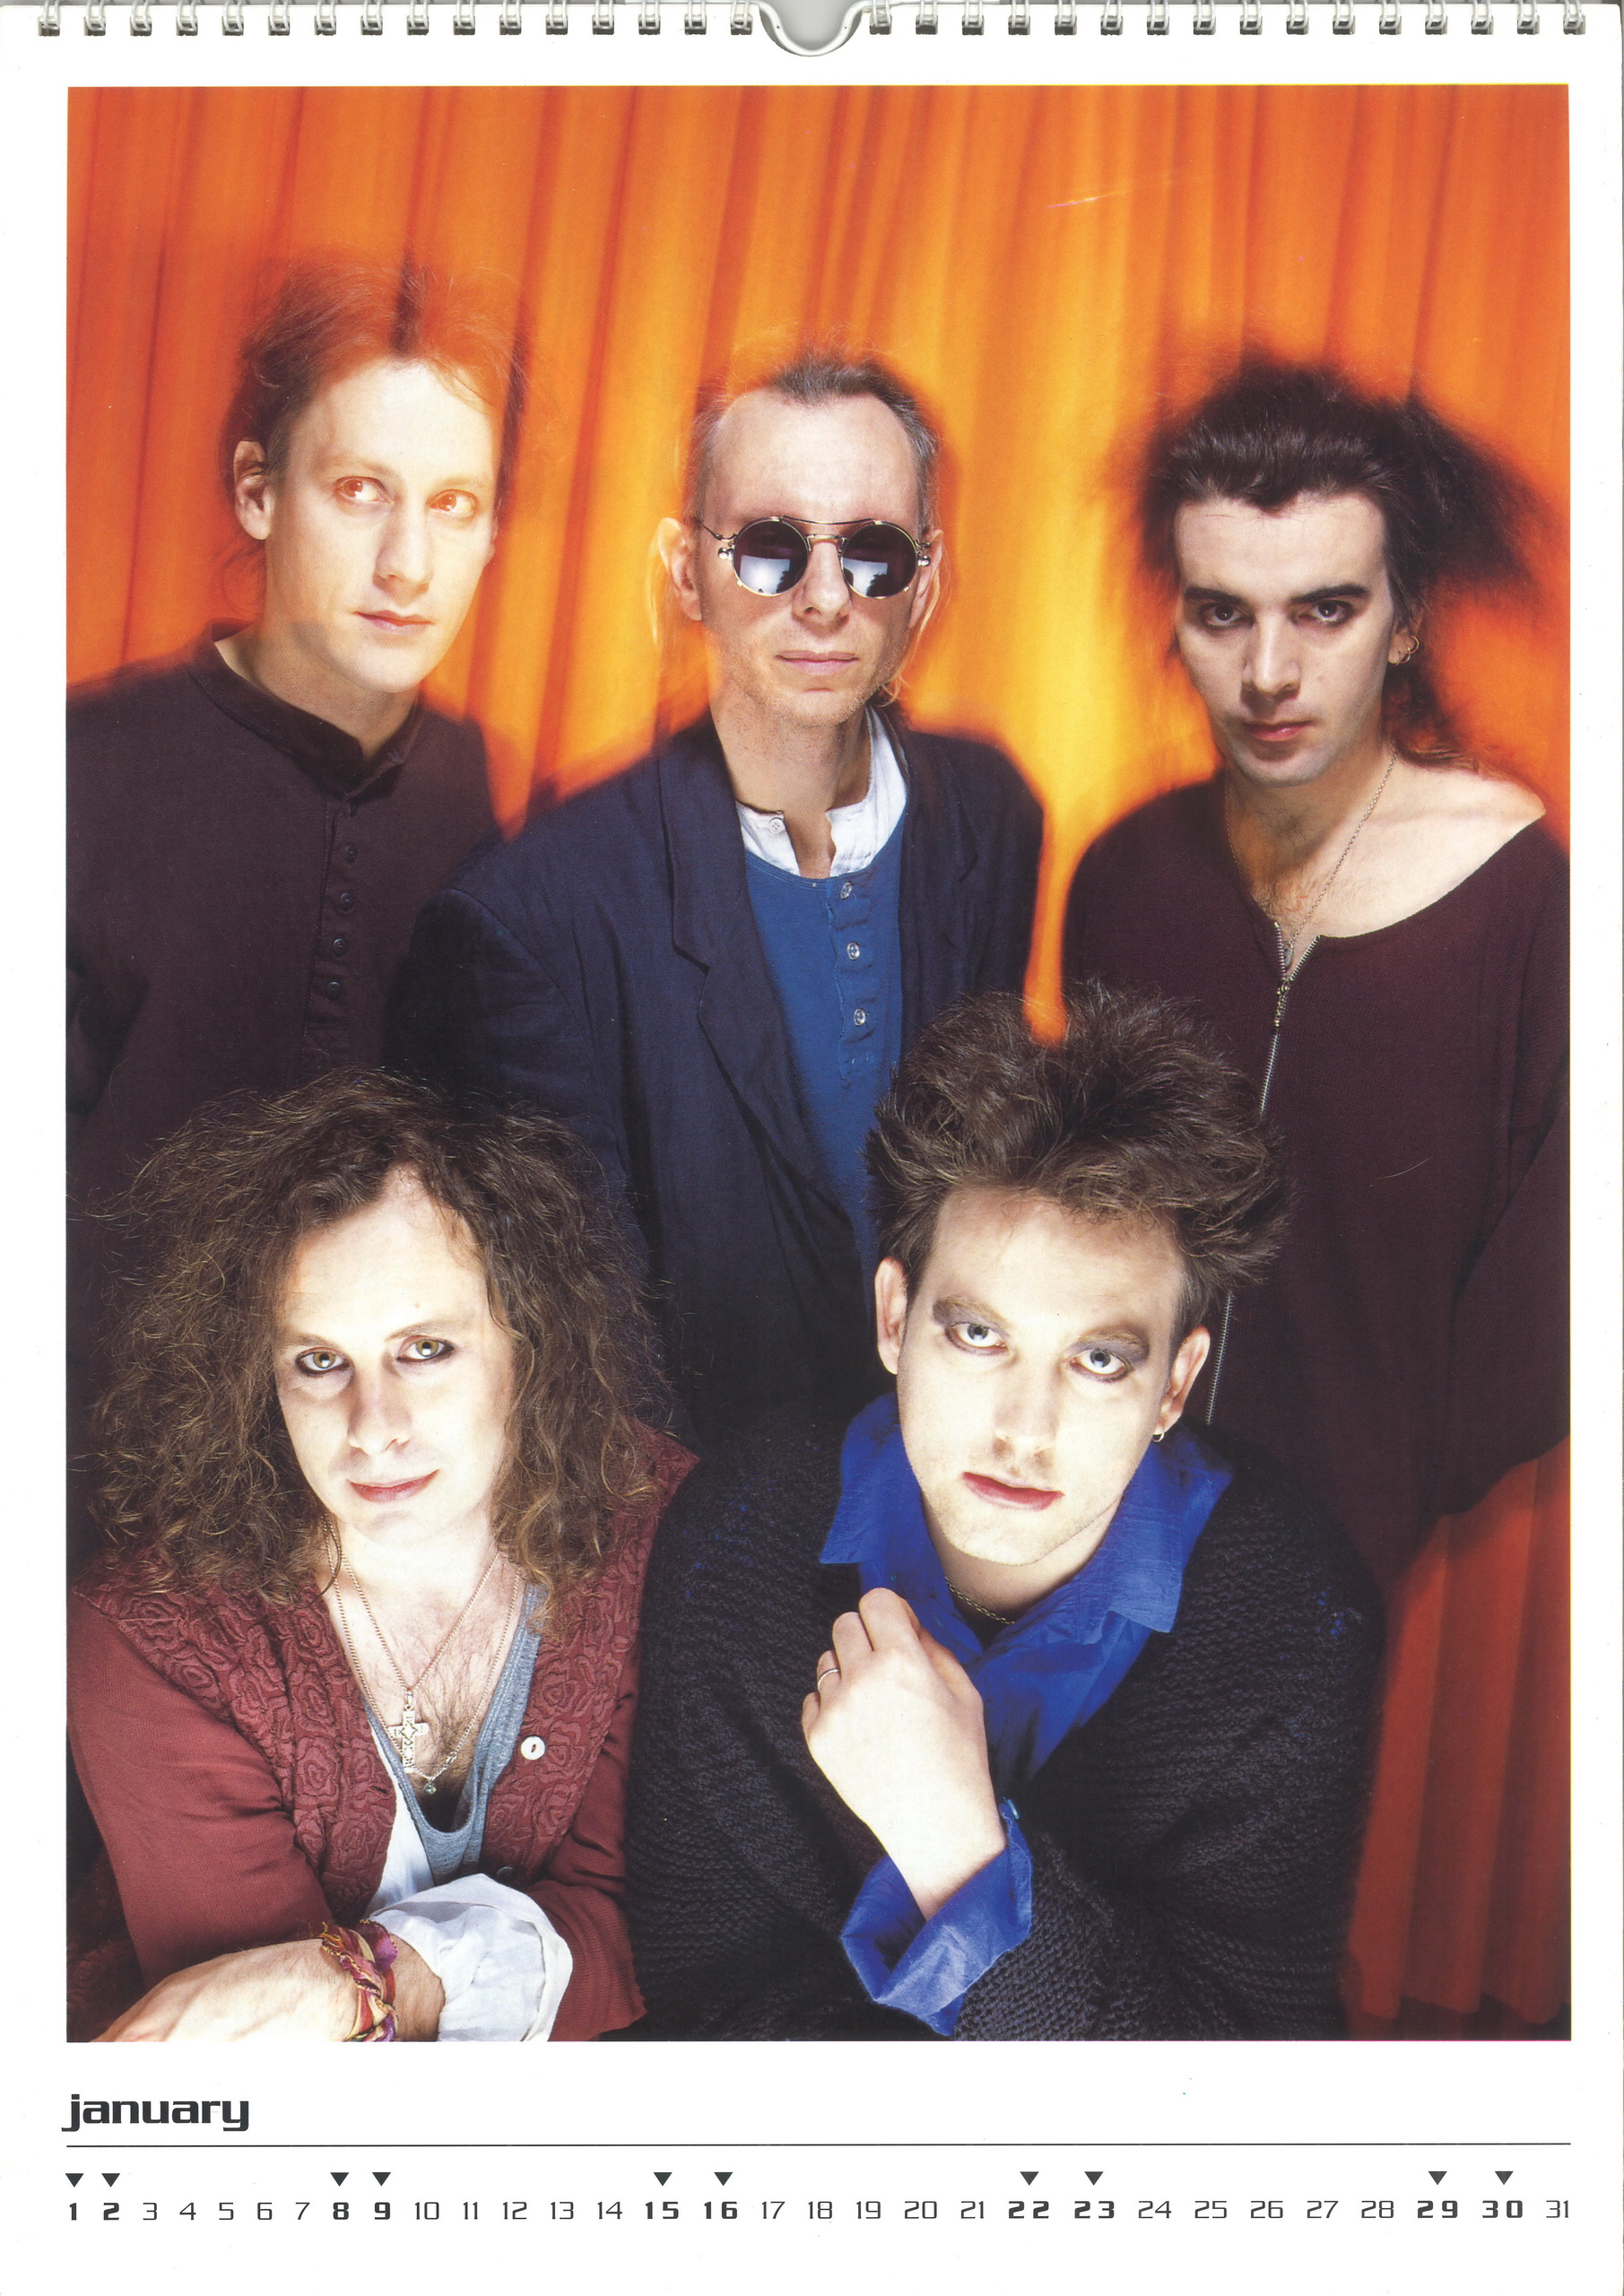 The Cure 2000 Calendar The Cure Flowers Of Love www thecure cz